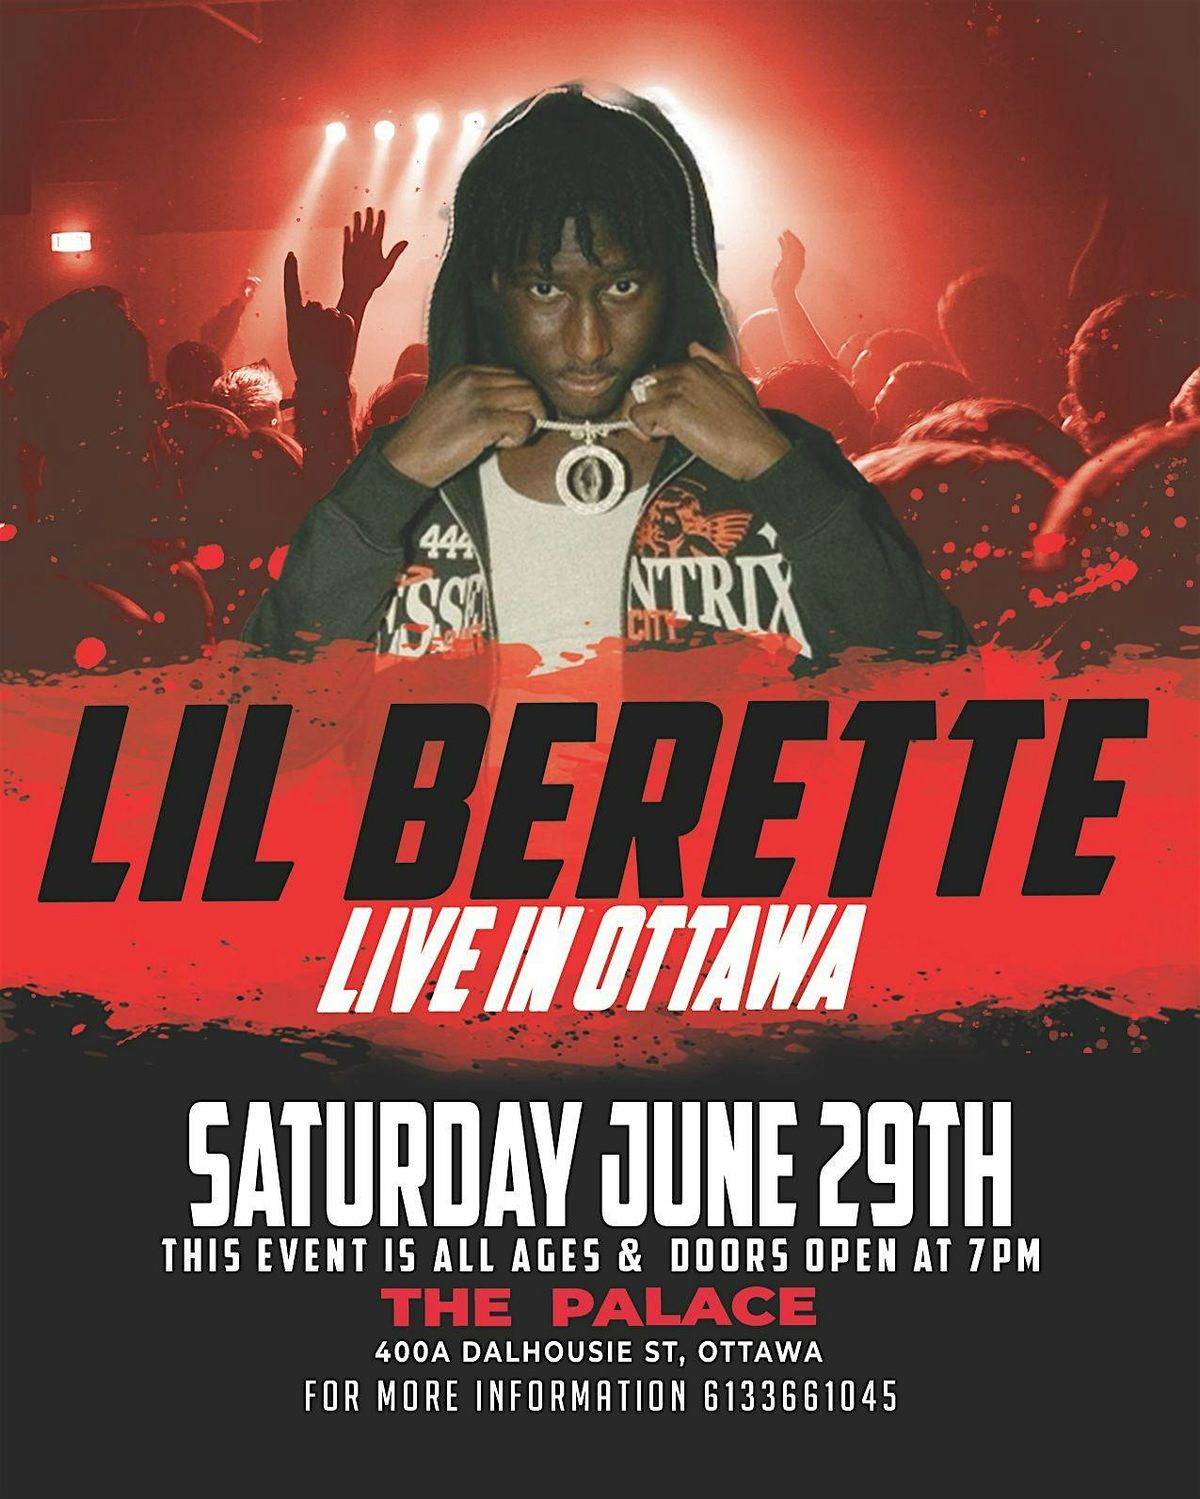 LIL BERETE LIVE IN CONCERT OTTAWA ALL AGES